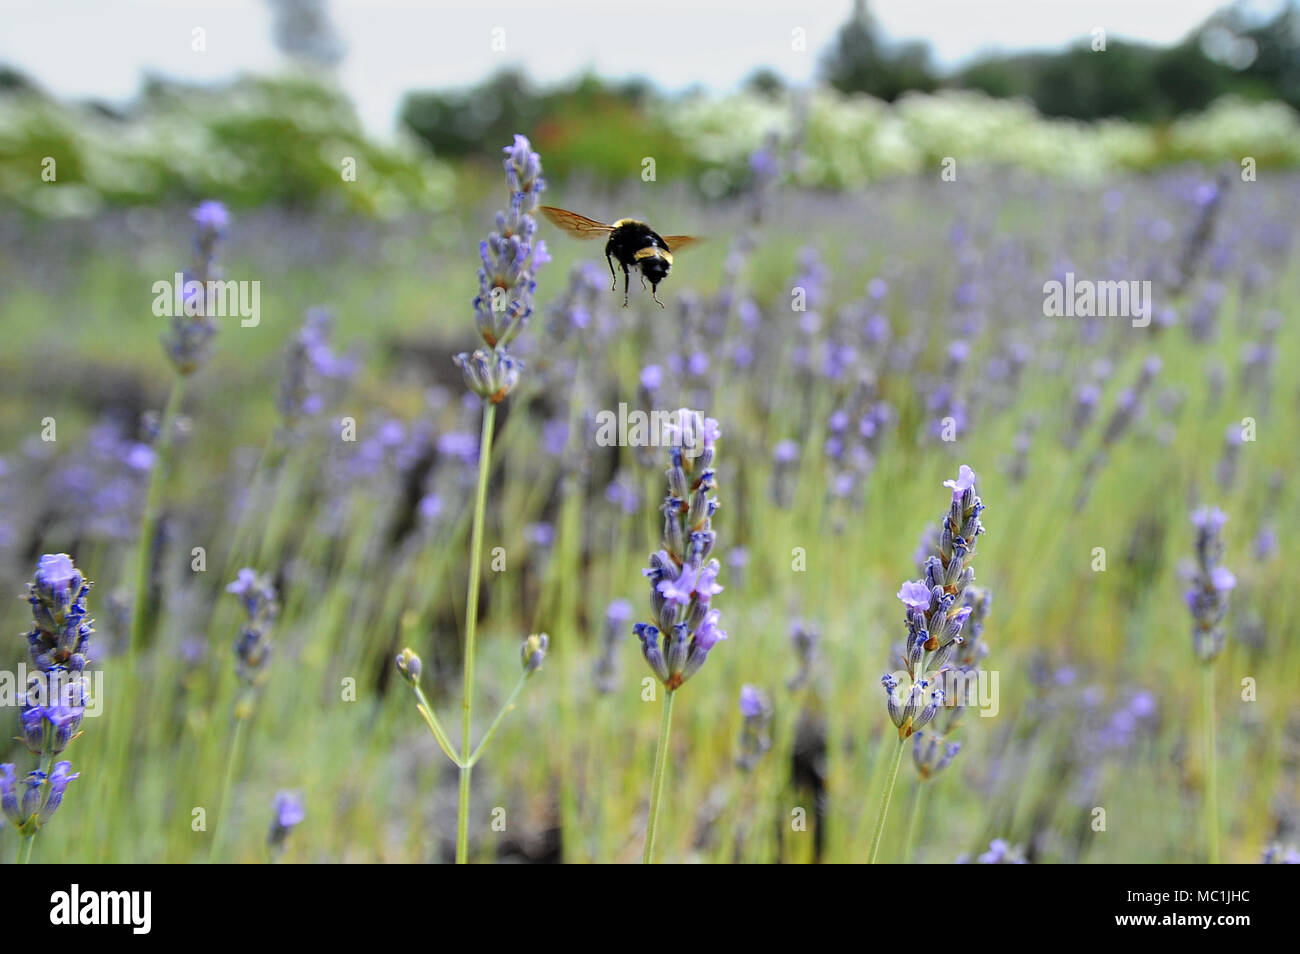 A bumblebee hovers over a row of lavender. Stock Photo